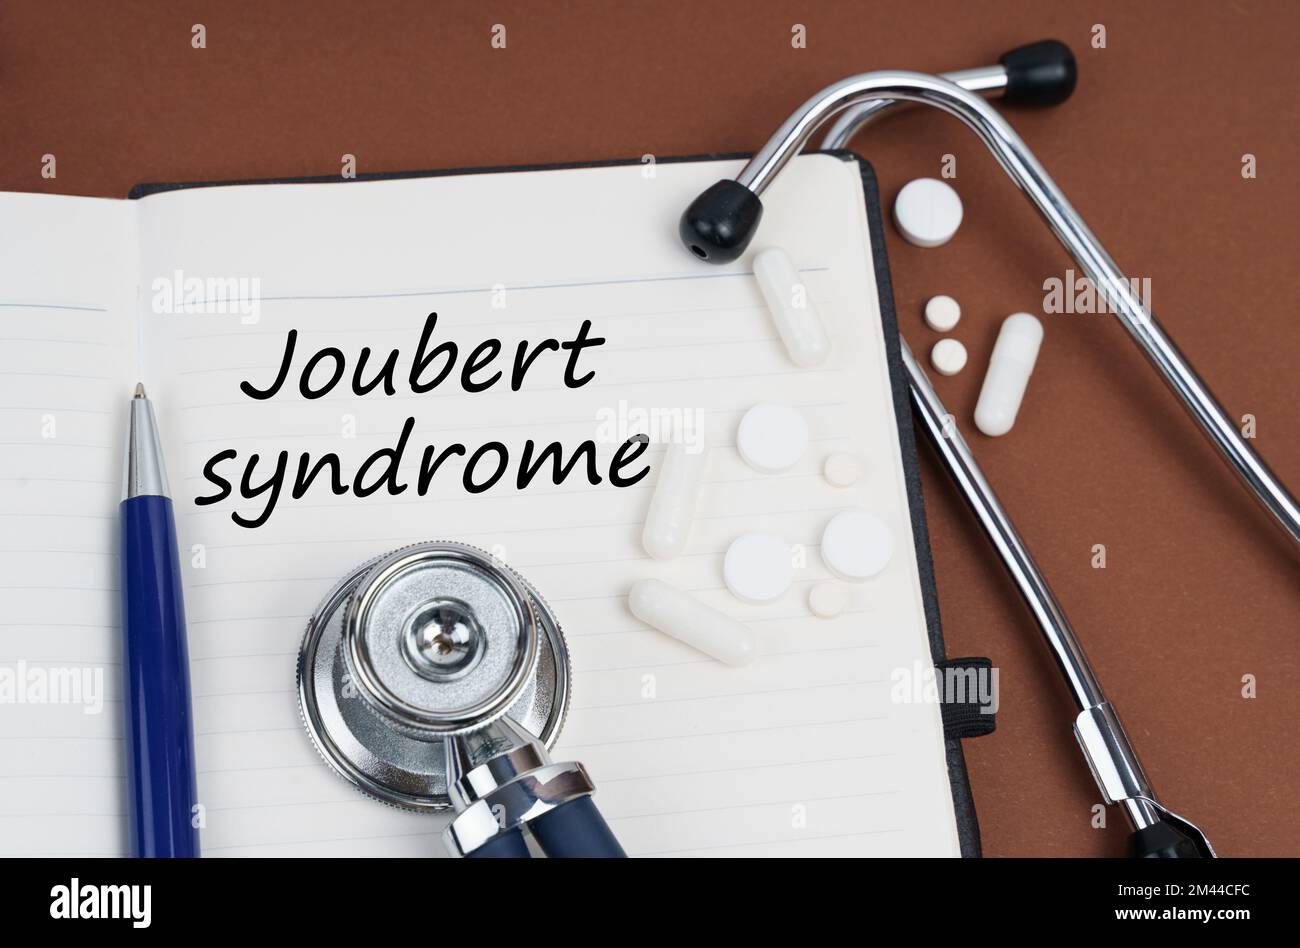 Medicine and health concept. On a brown surface lie pills, a pen, a stethoscope and a notebook with the inscription - Joubert syndrome Stock Photo